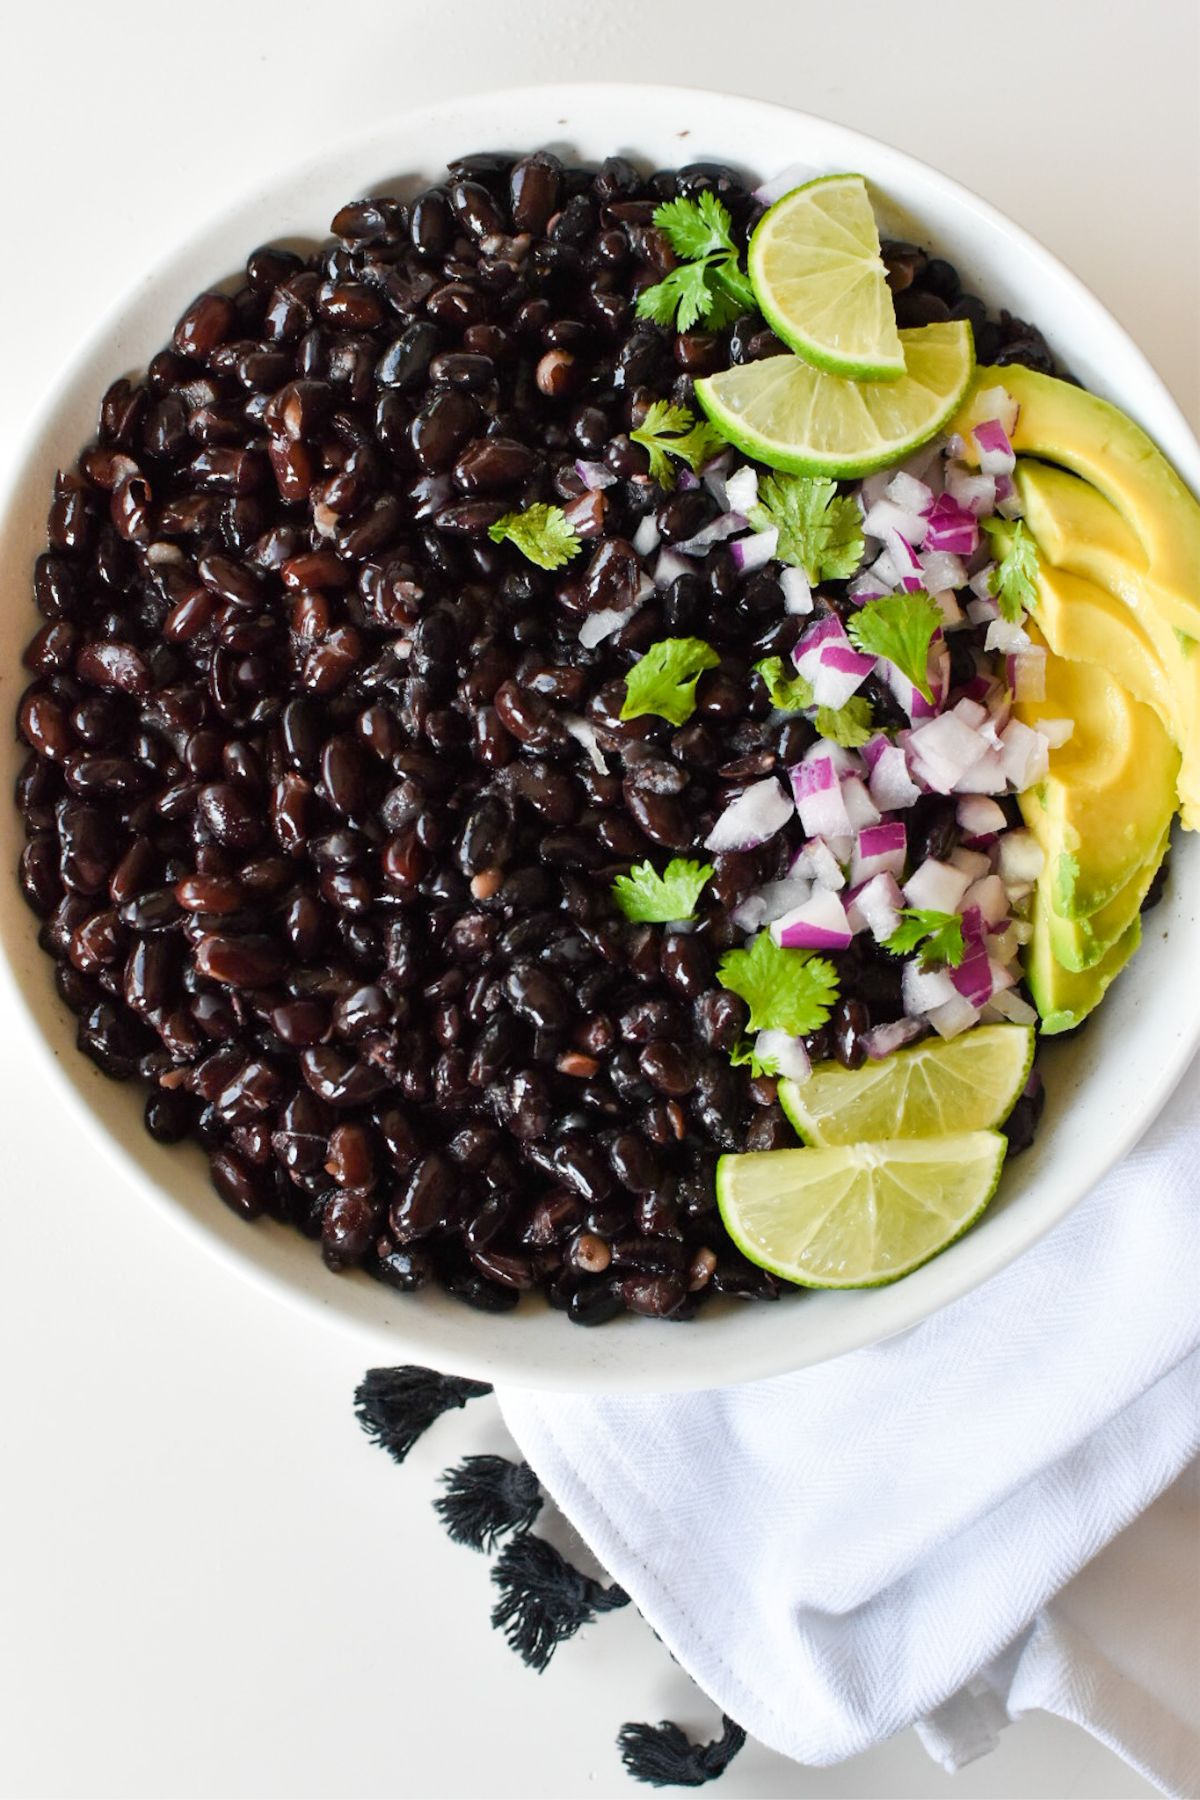 Black beans in a bowl with fresh cilantro, red onion, avocado and limes.